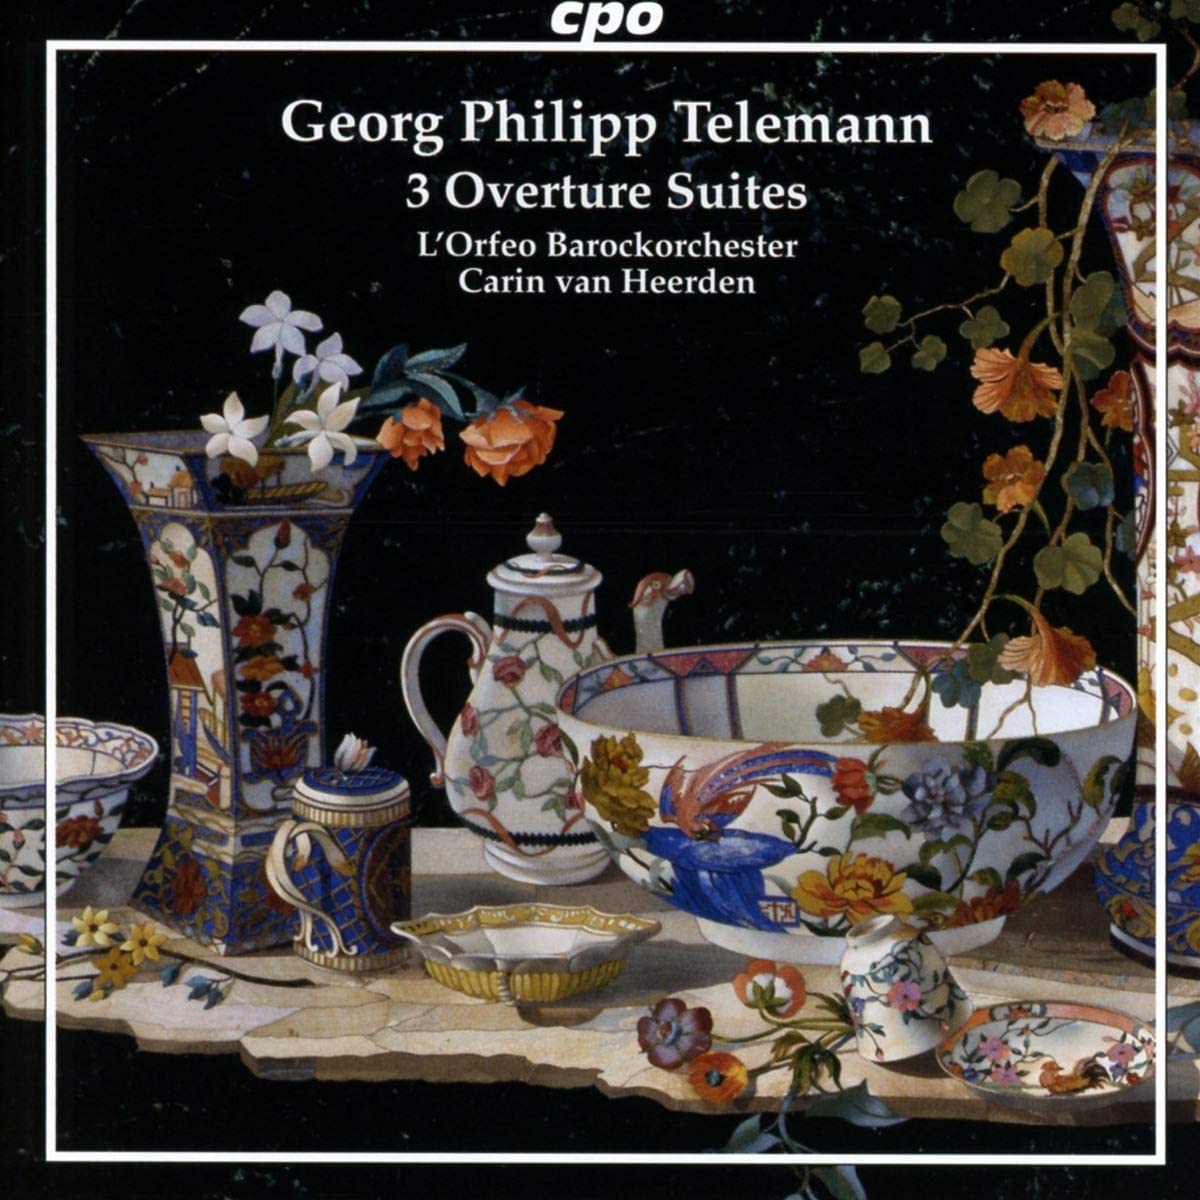 CD cover of Telemann L'Orfeo Barockorchester